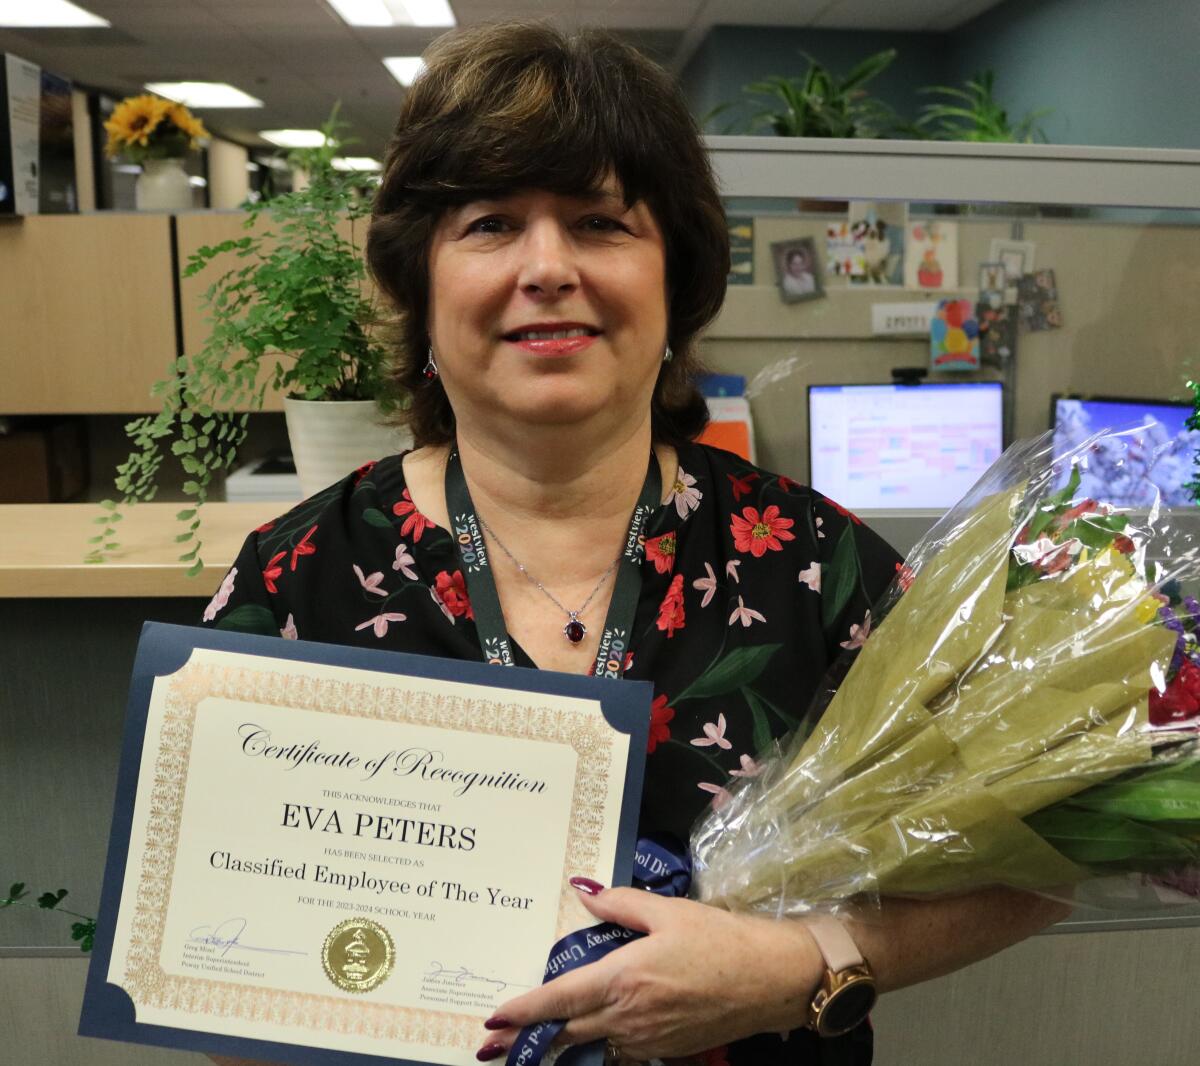 Eva Peters is an administrative assistant, Learning Support Services at the Poway Unified district office.